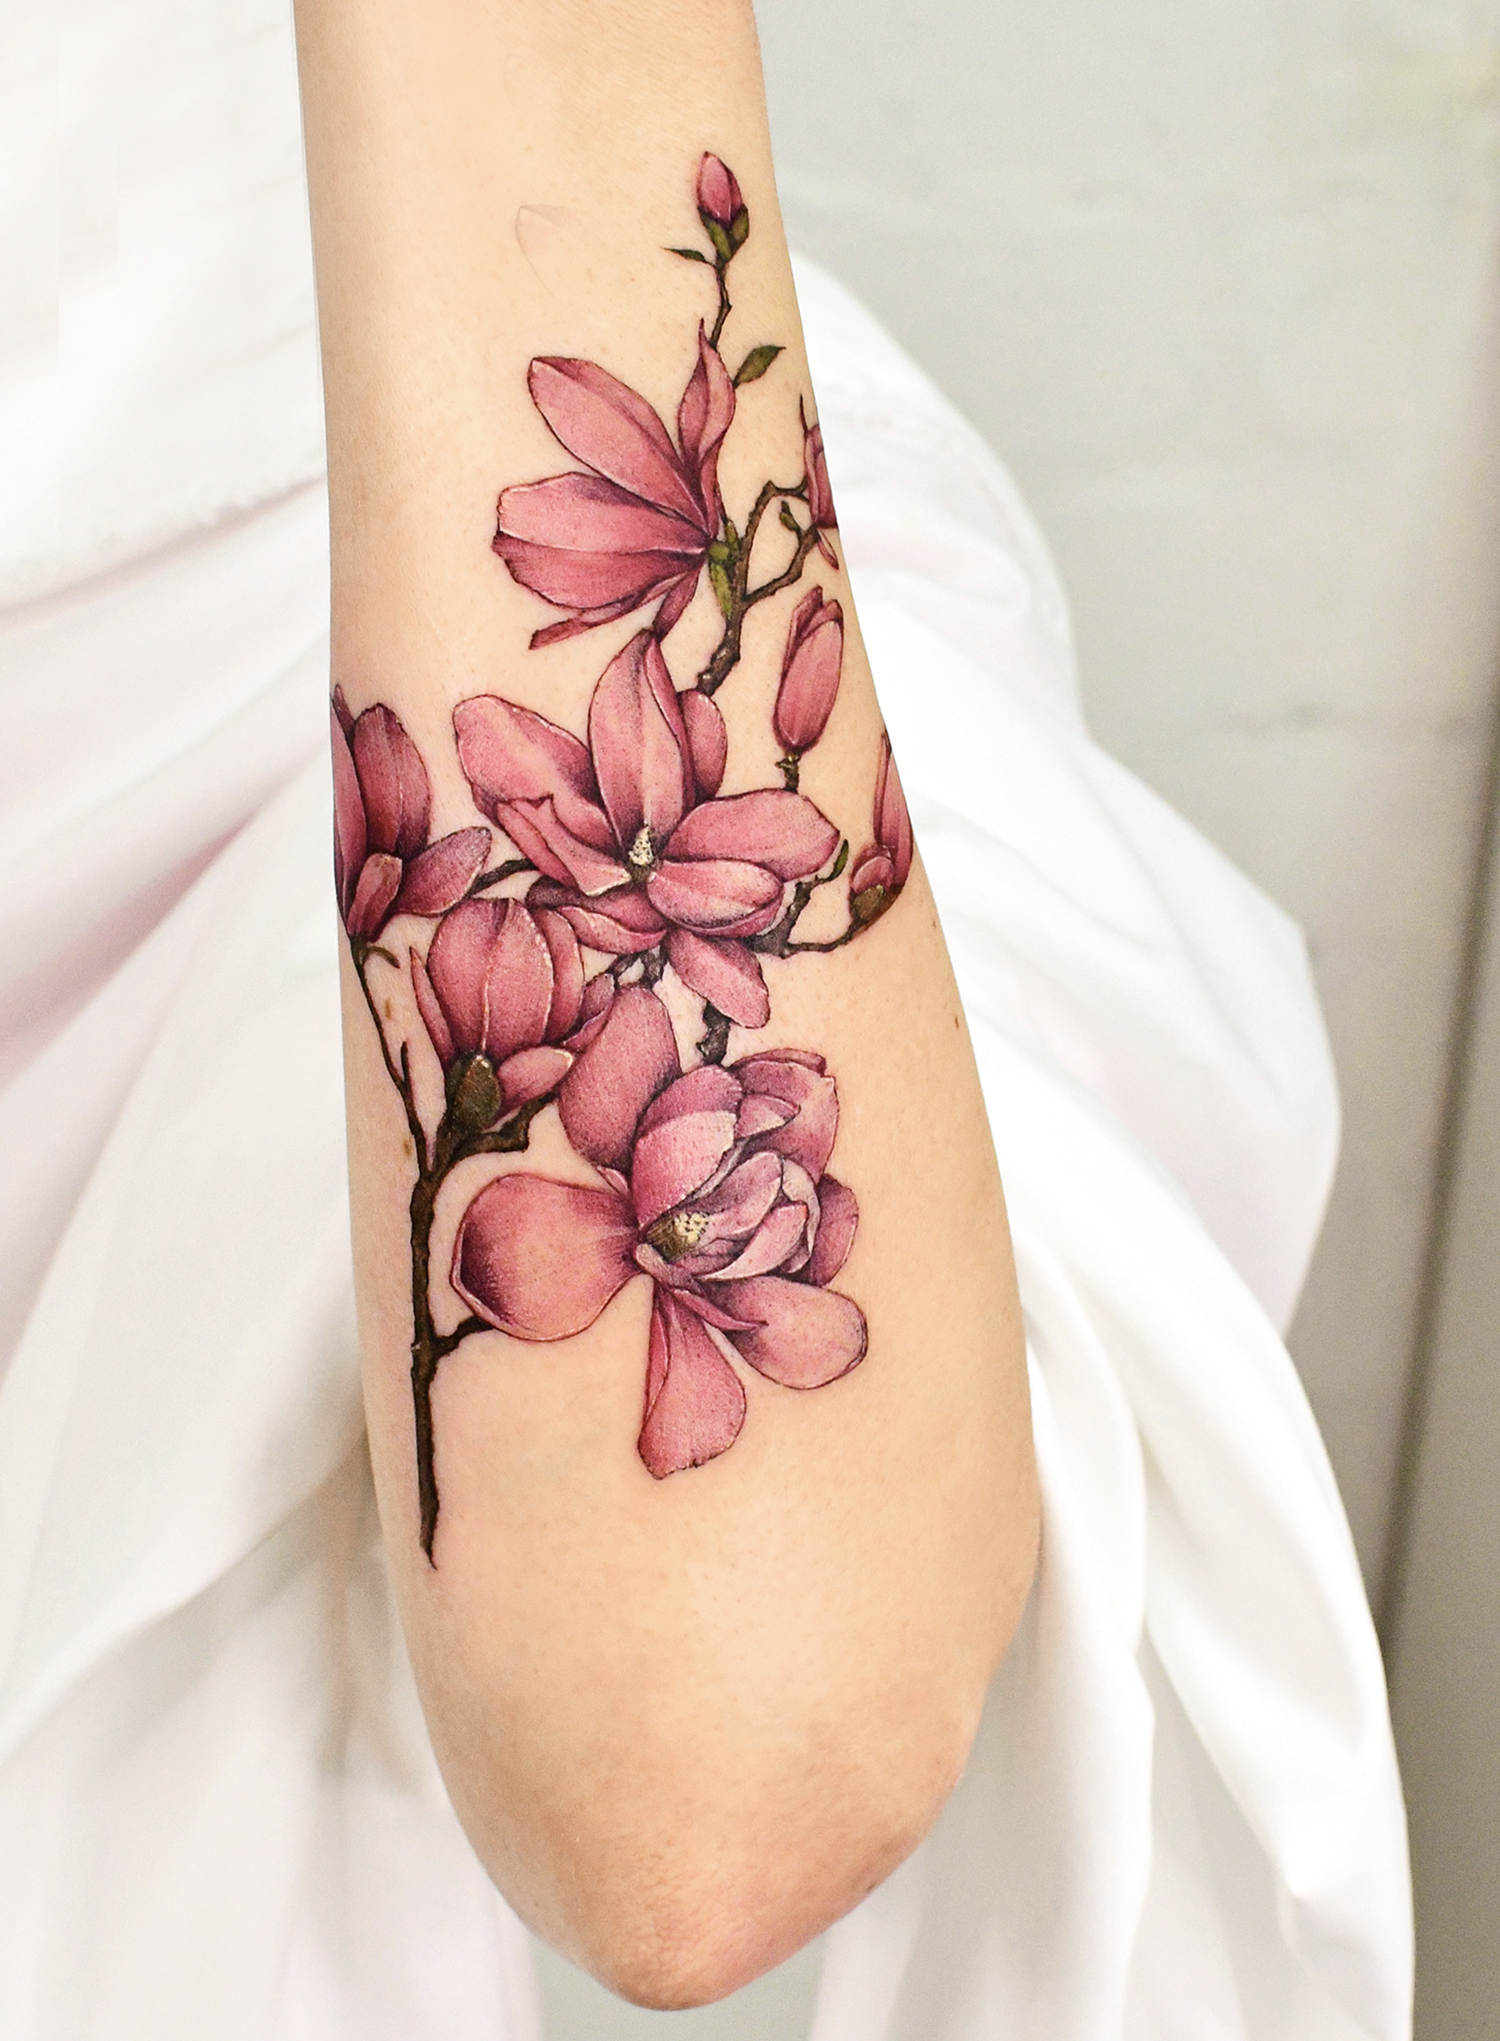 more flowers in pink by yerae